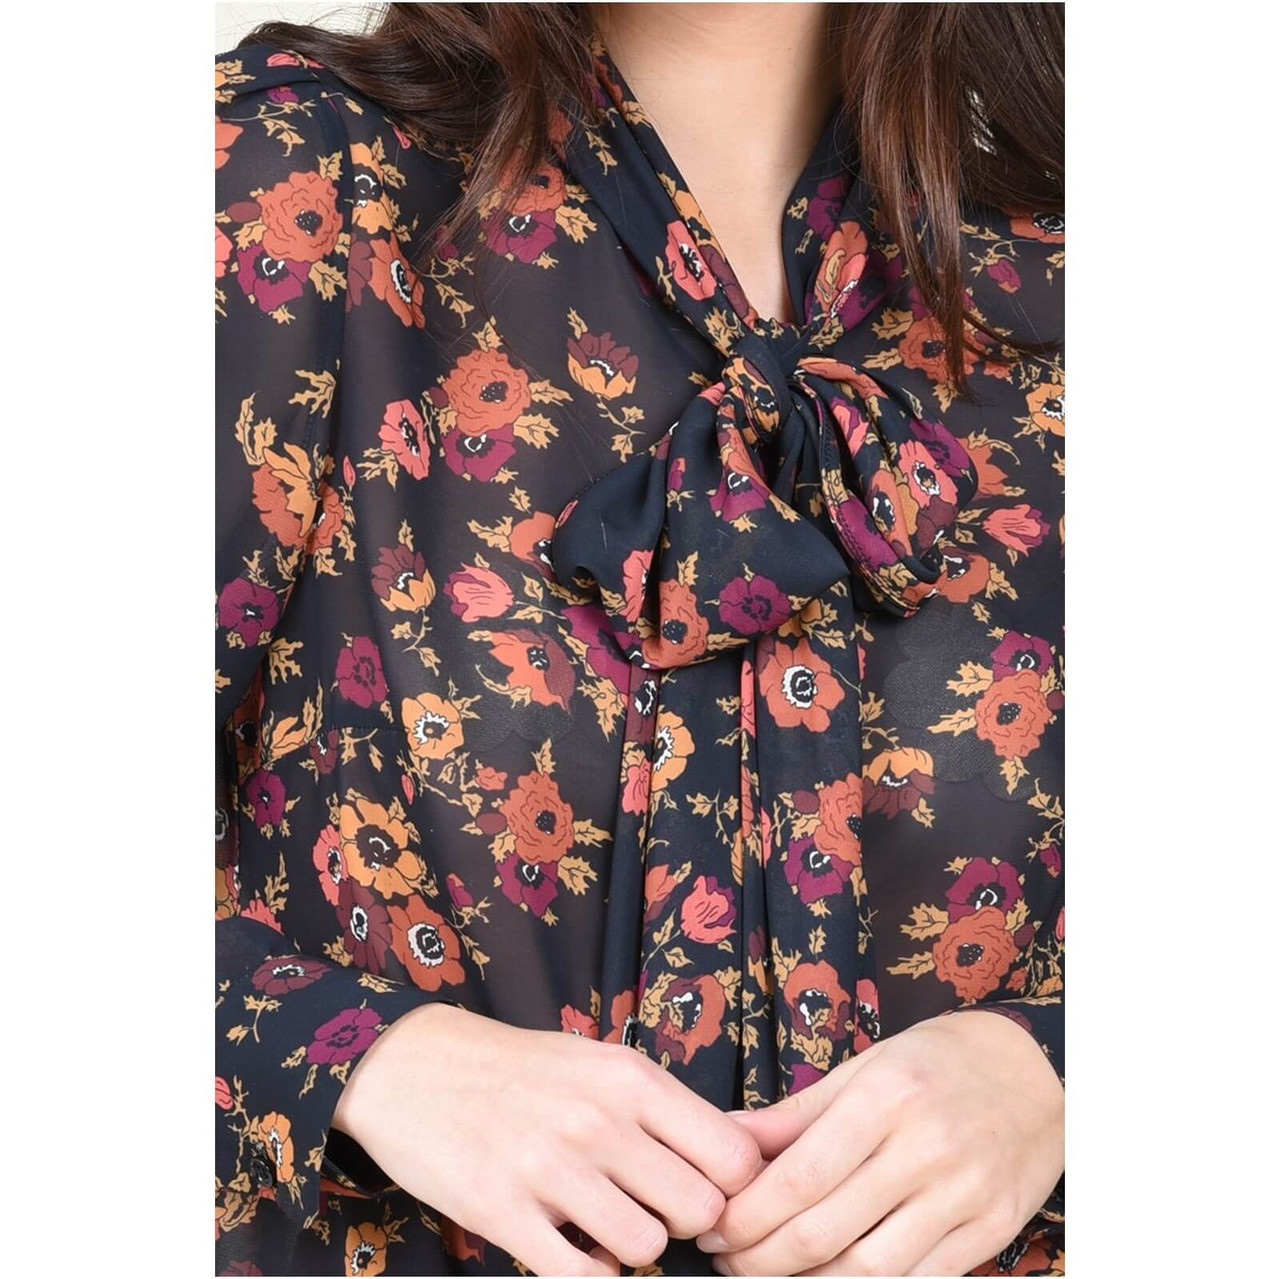 Molly Bracken Black and Floral Blouse